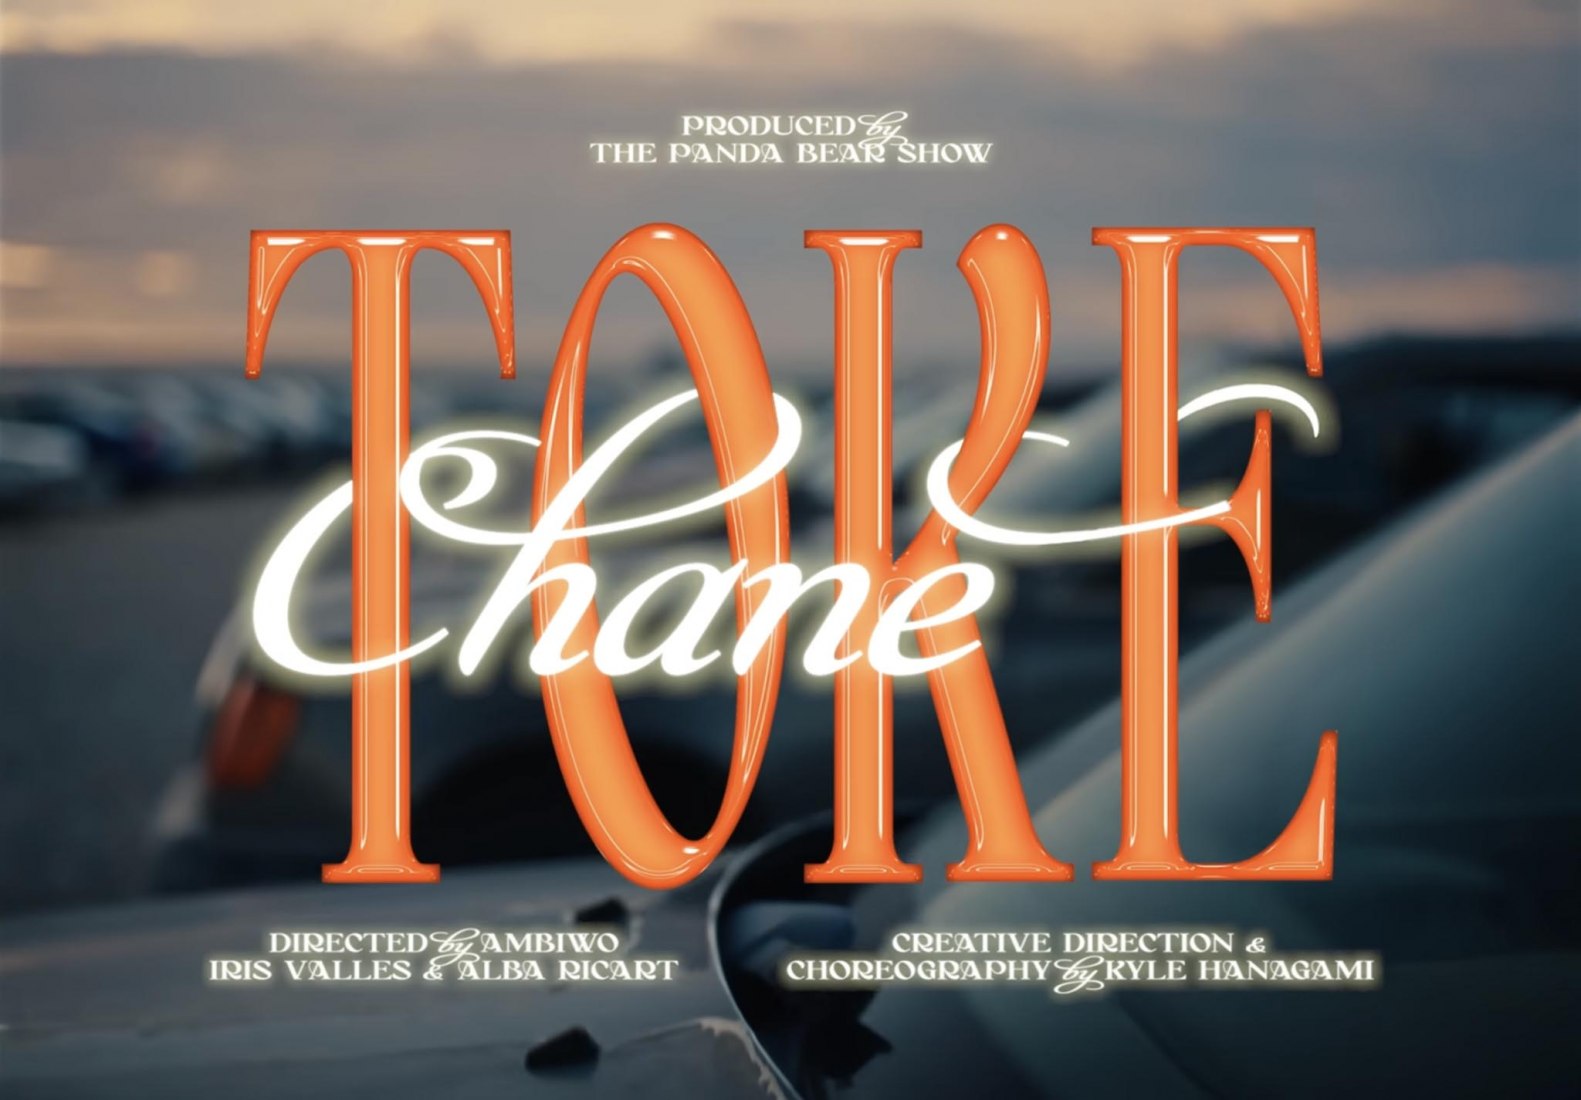 ‘Toke’ by Chanel